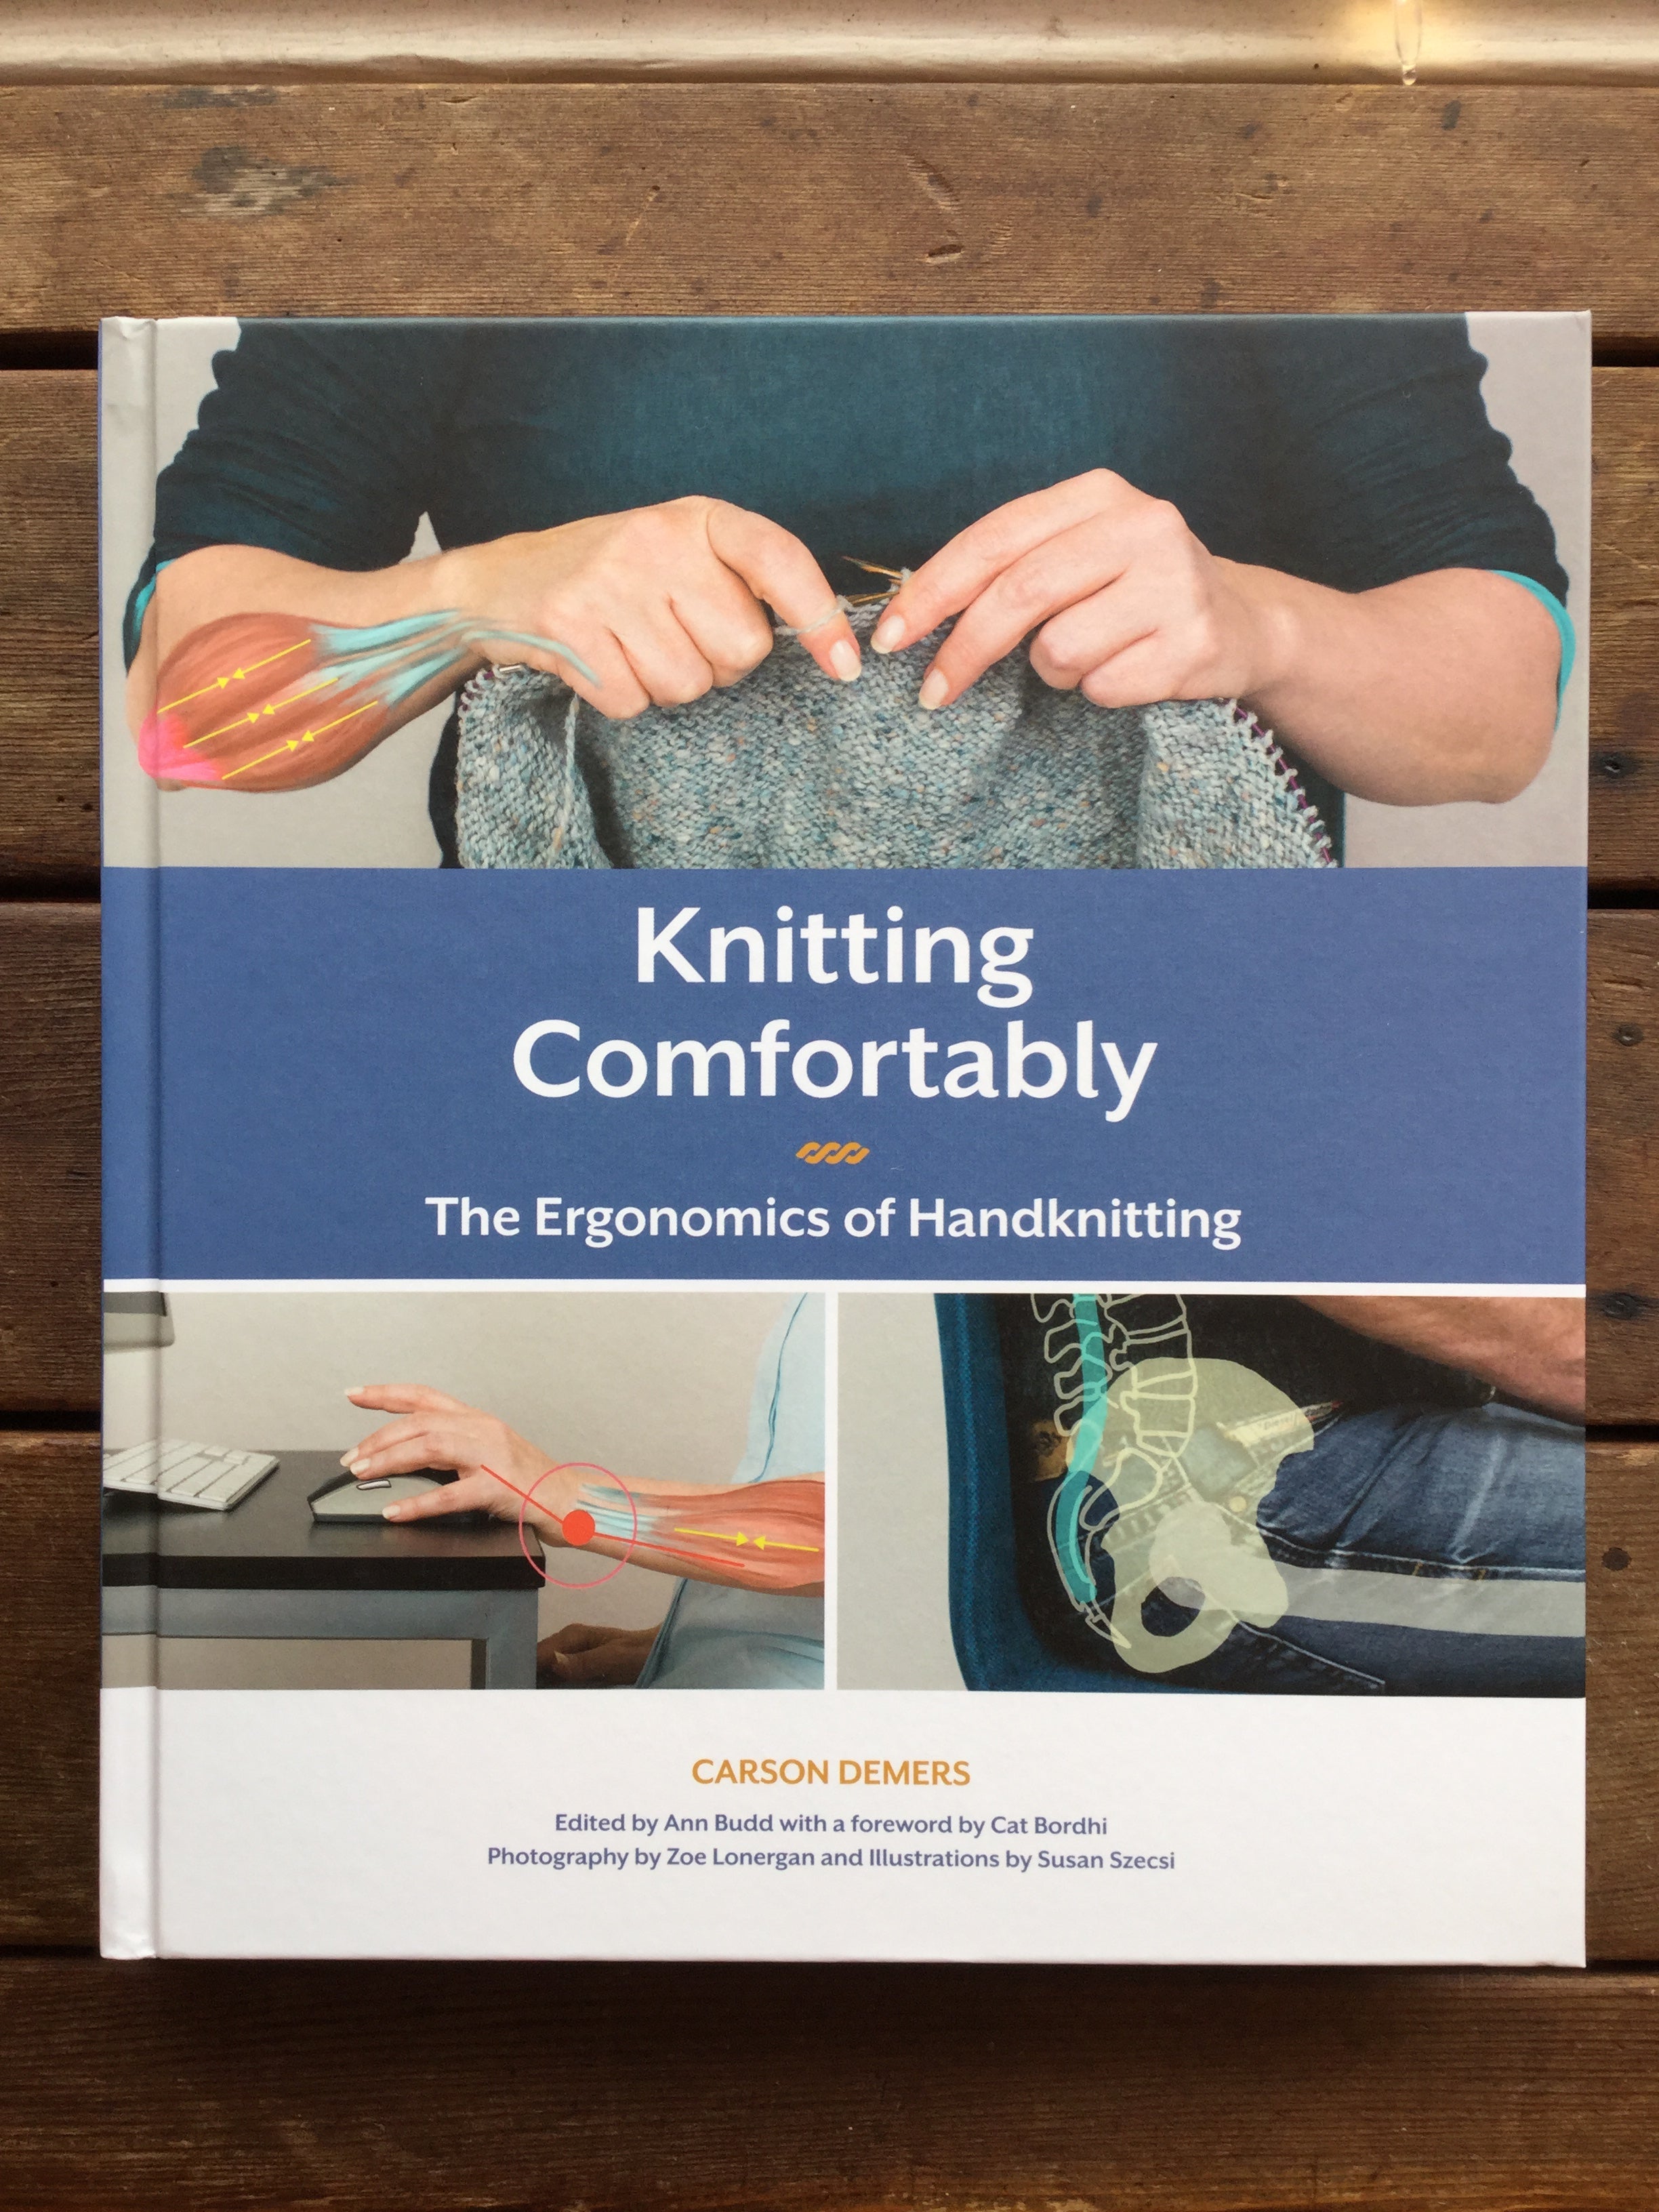 Knitting Comfortably book by Carson Demers